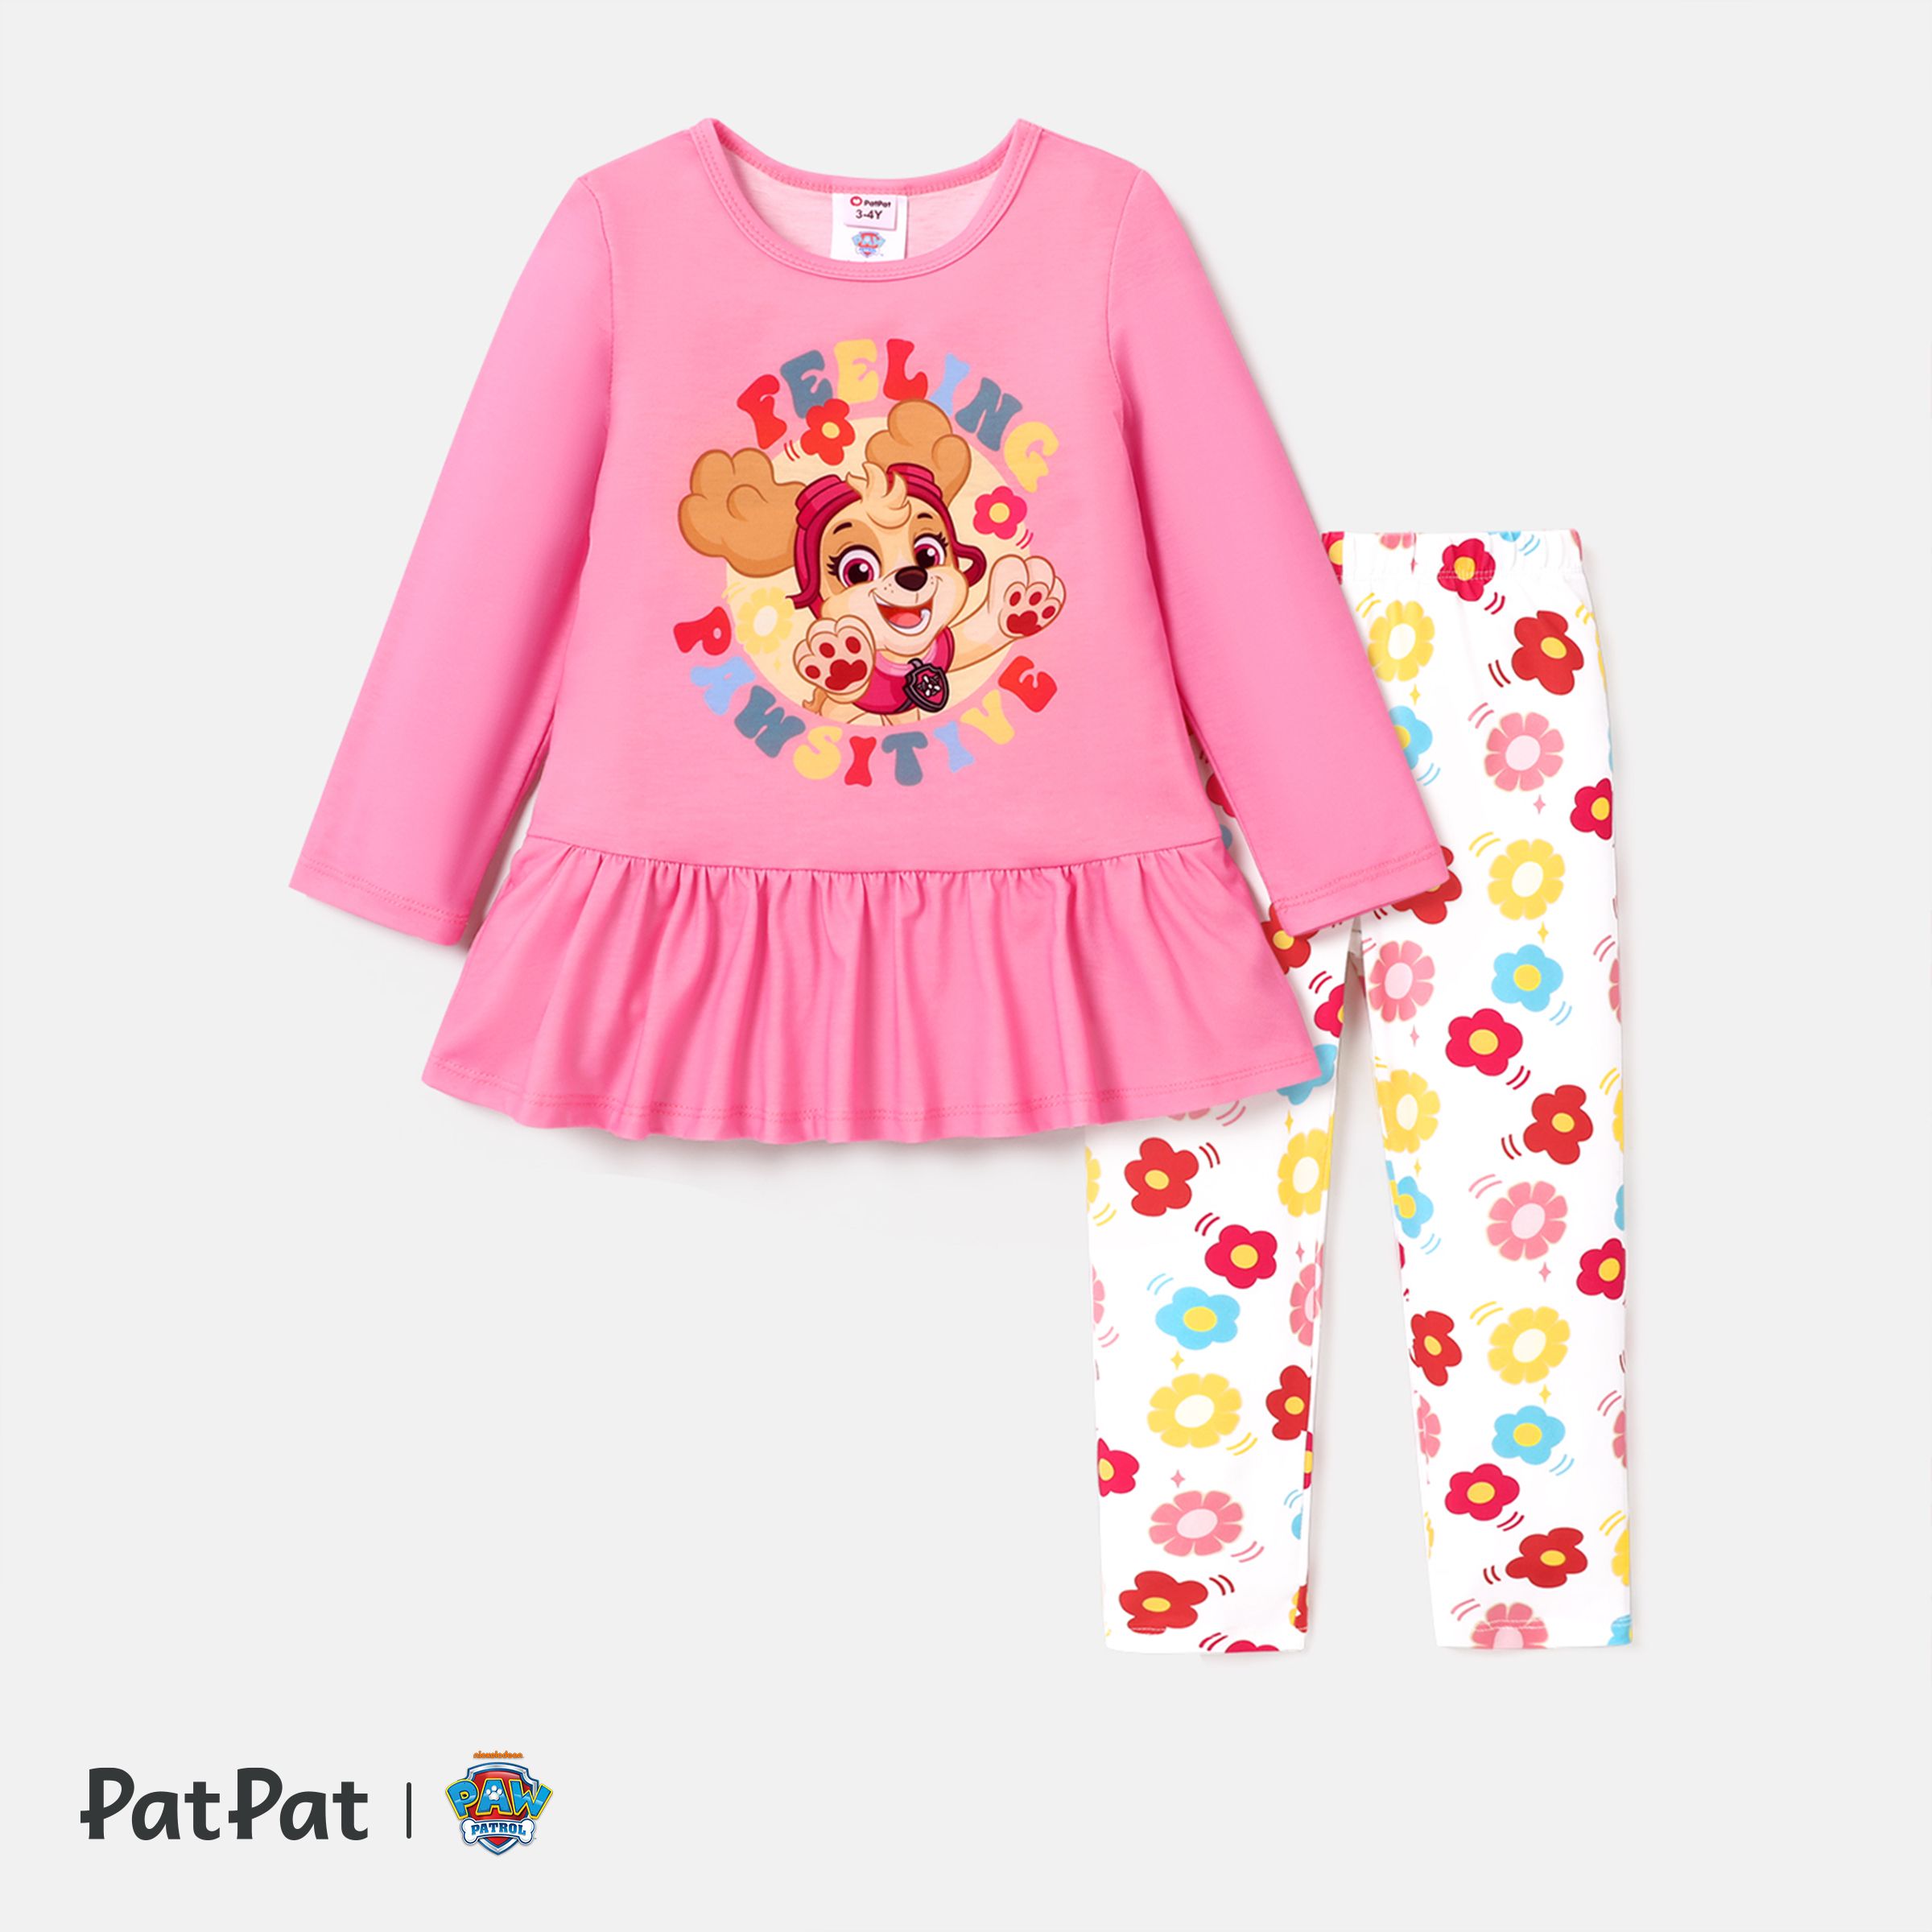 PAW Patrol Toddler Girl’s Two-Piece Cartoon Printed Ruffle Top And Bottom Set